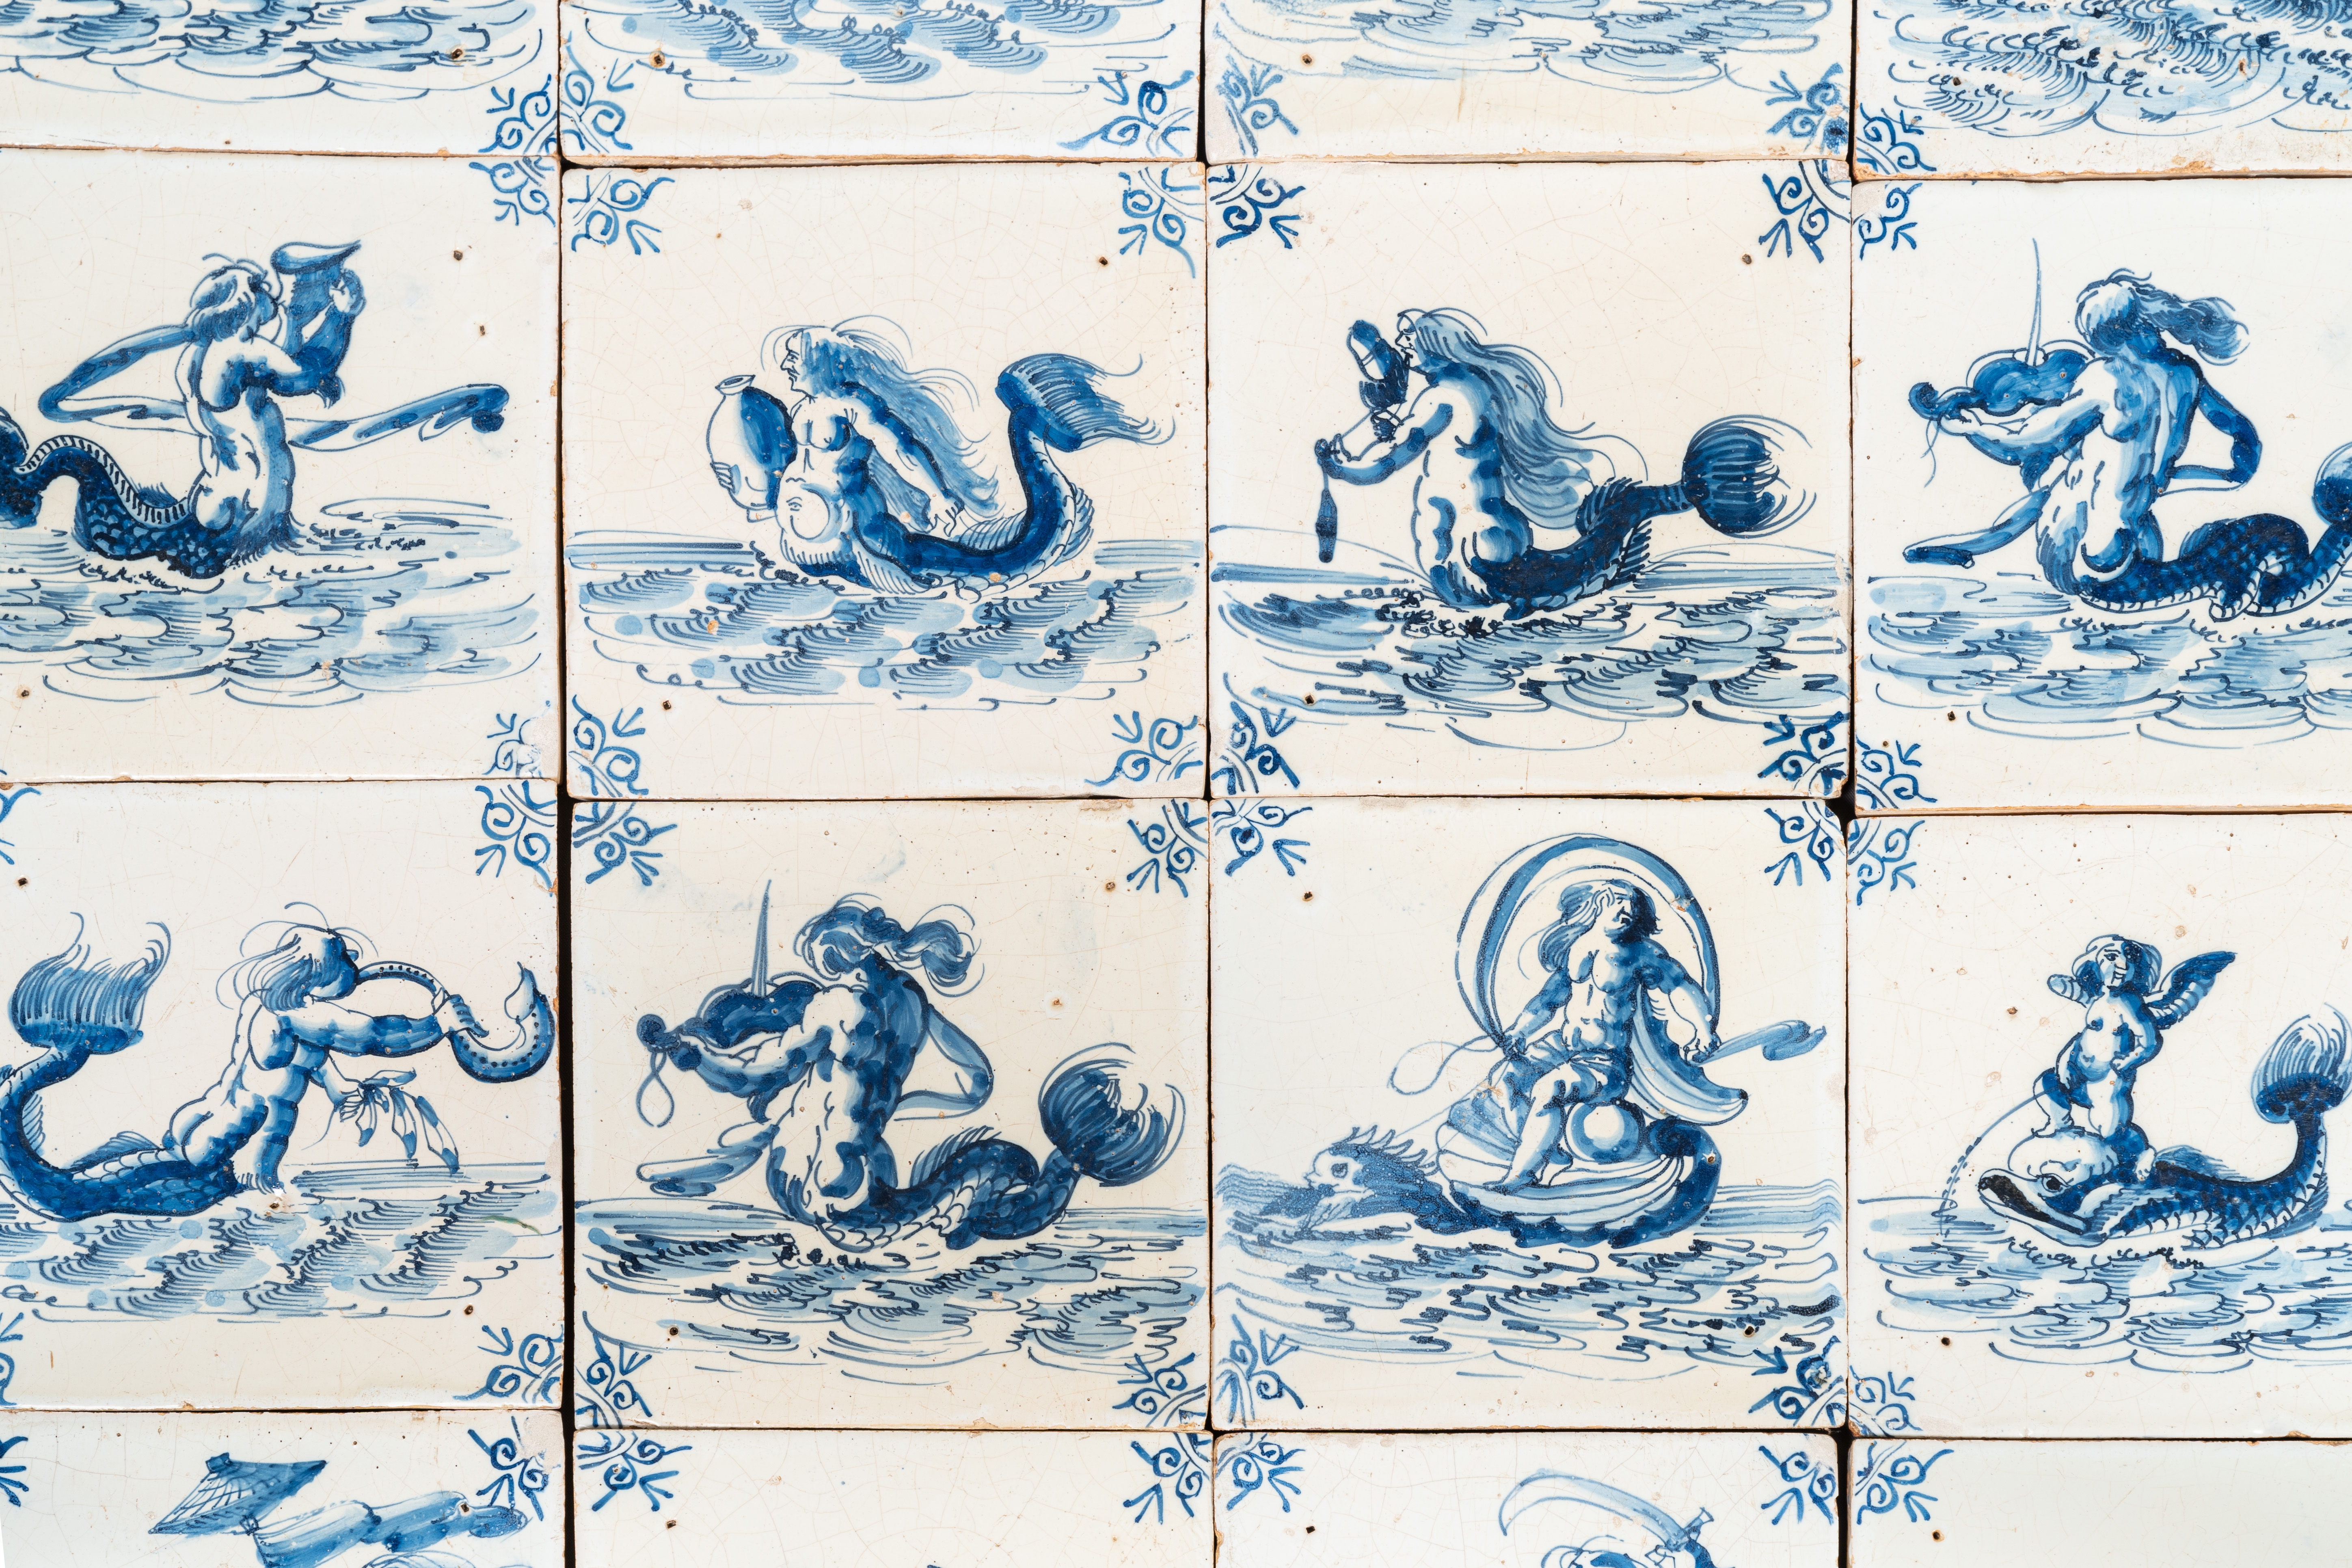 An exceptional set of 25 Dutch Delft blue and white tiles with fine sea monsters, Harlingen, Friesla - Image 2 of 4